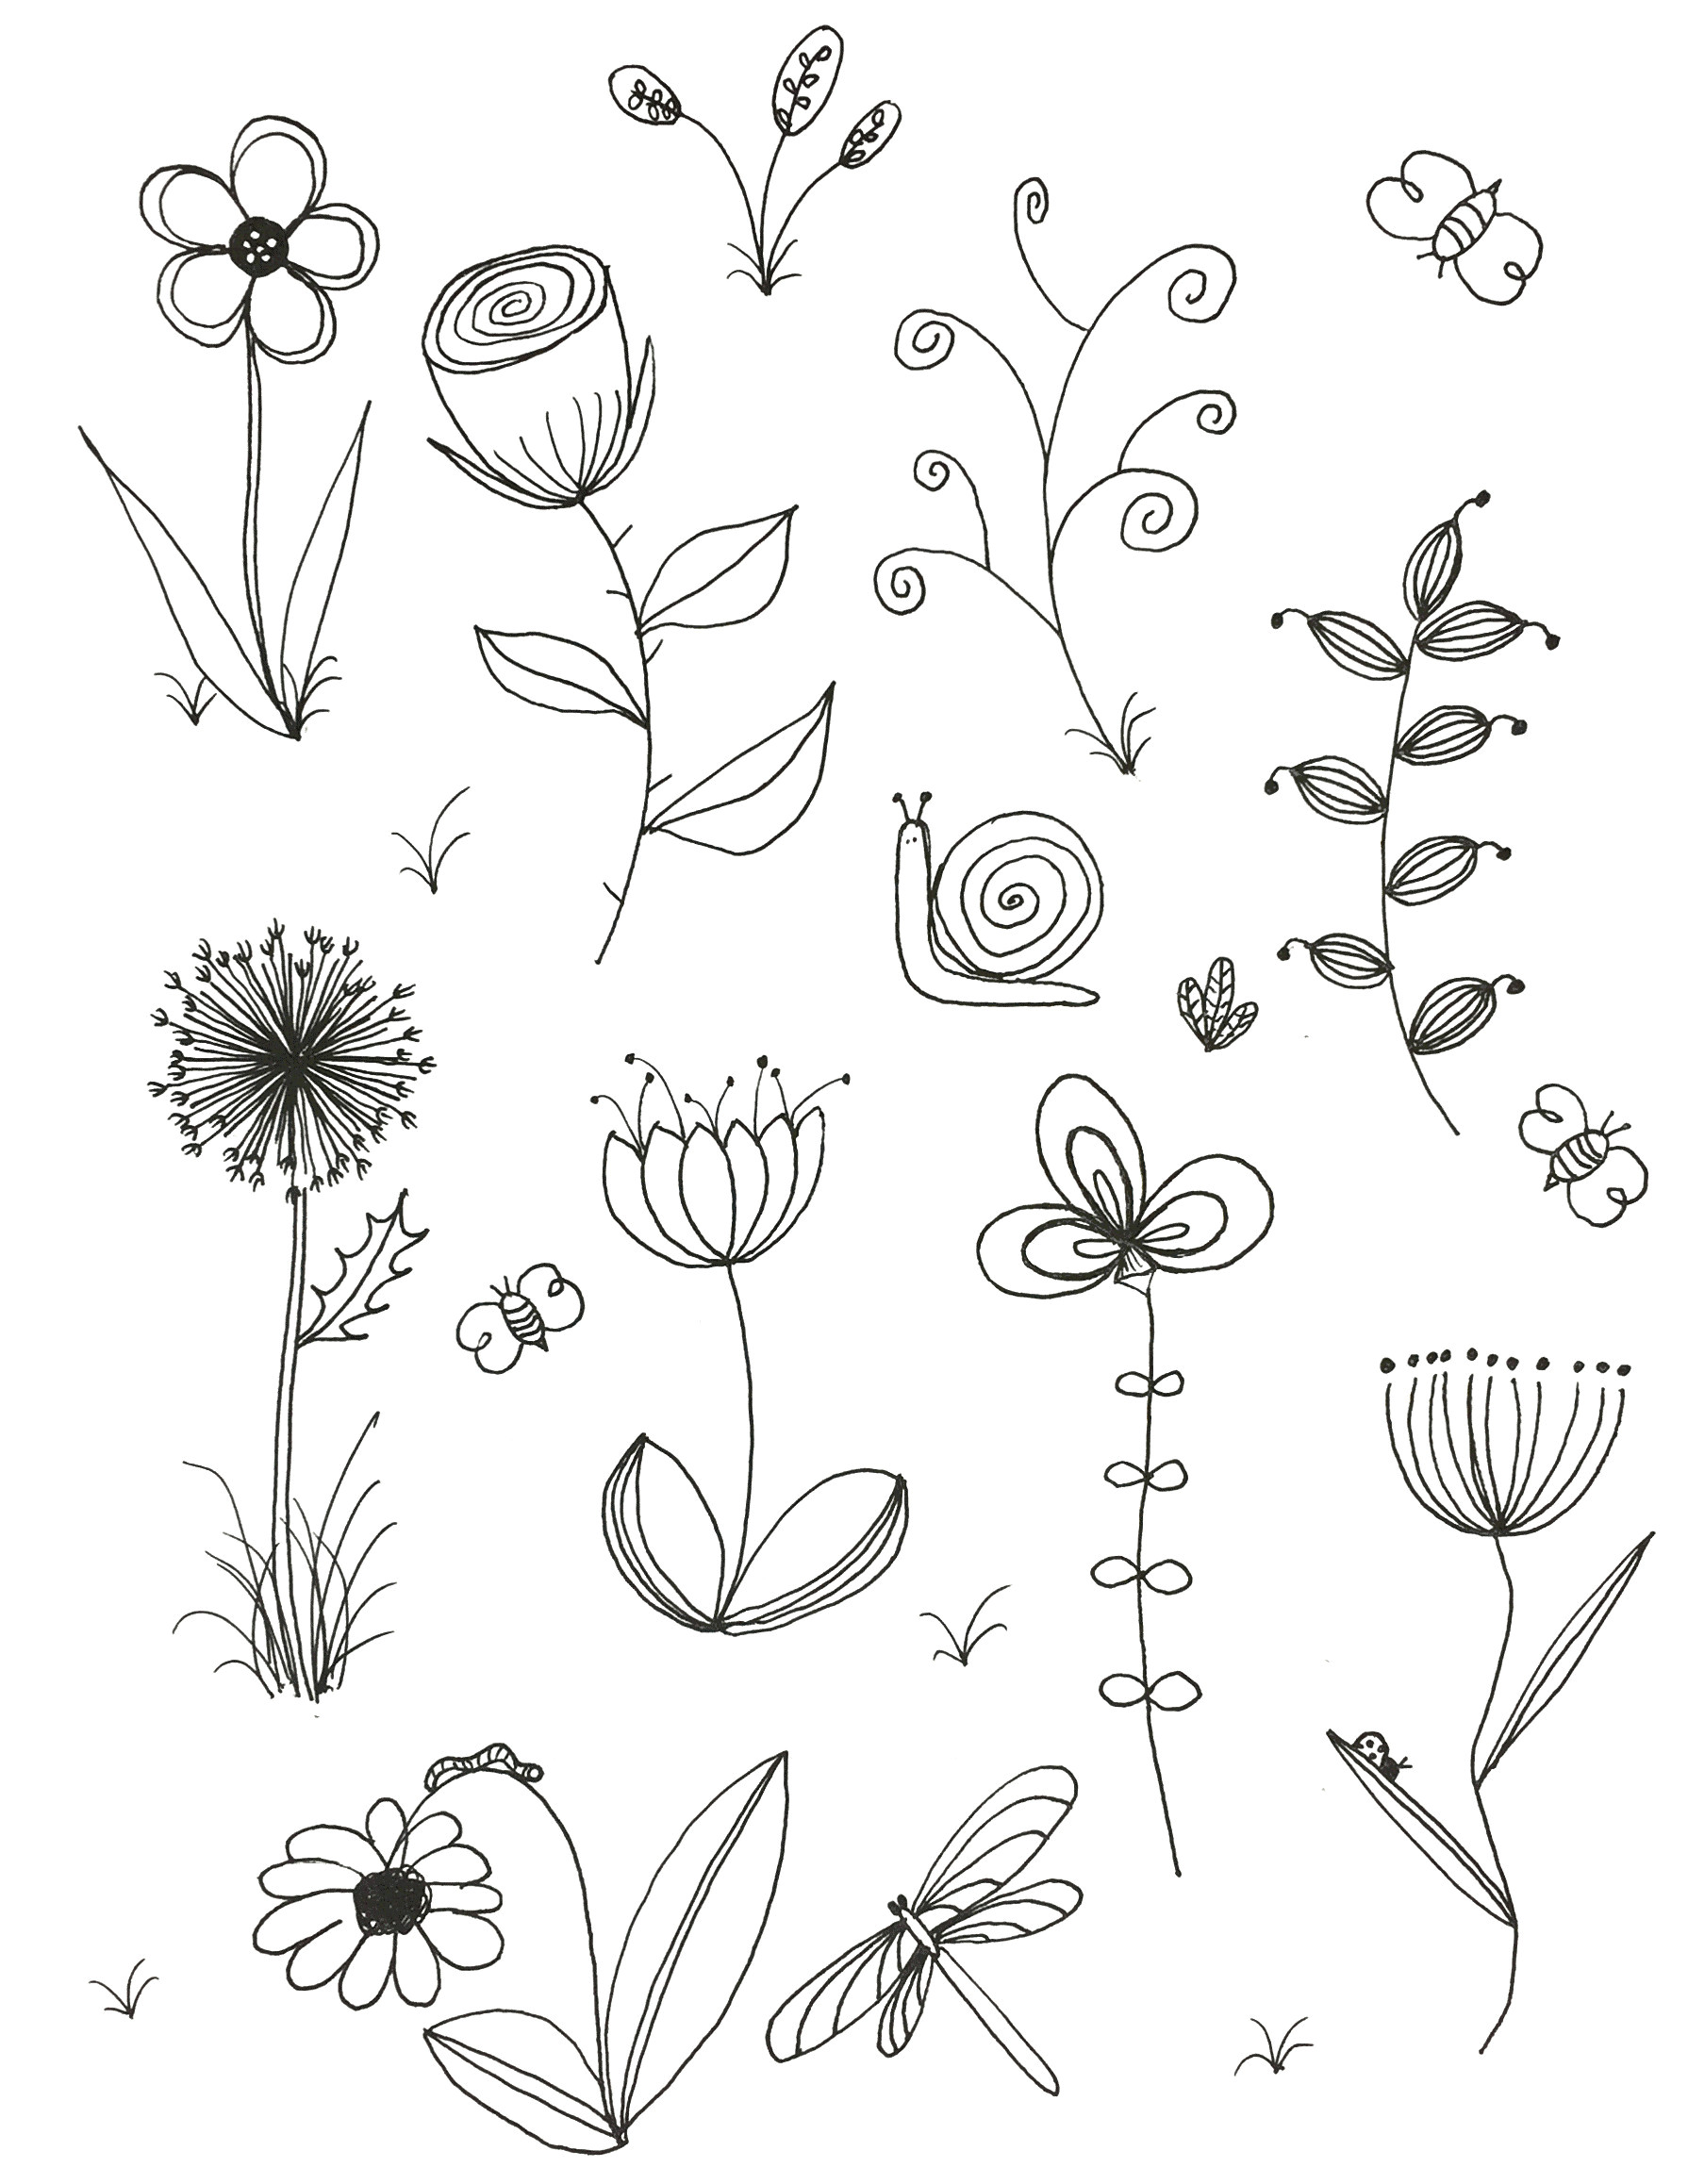 easy to draw spring pictures my original art inspired by many doodle flower line drawing of